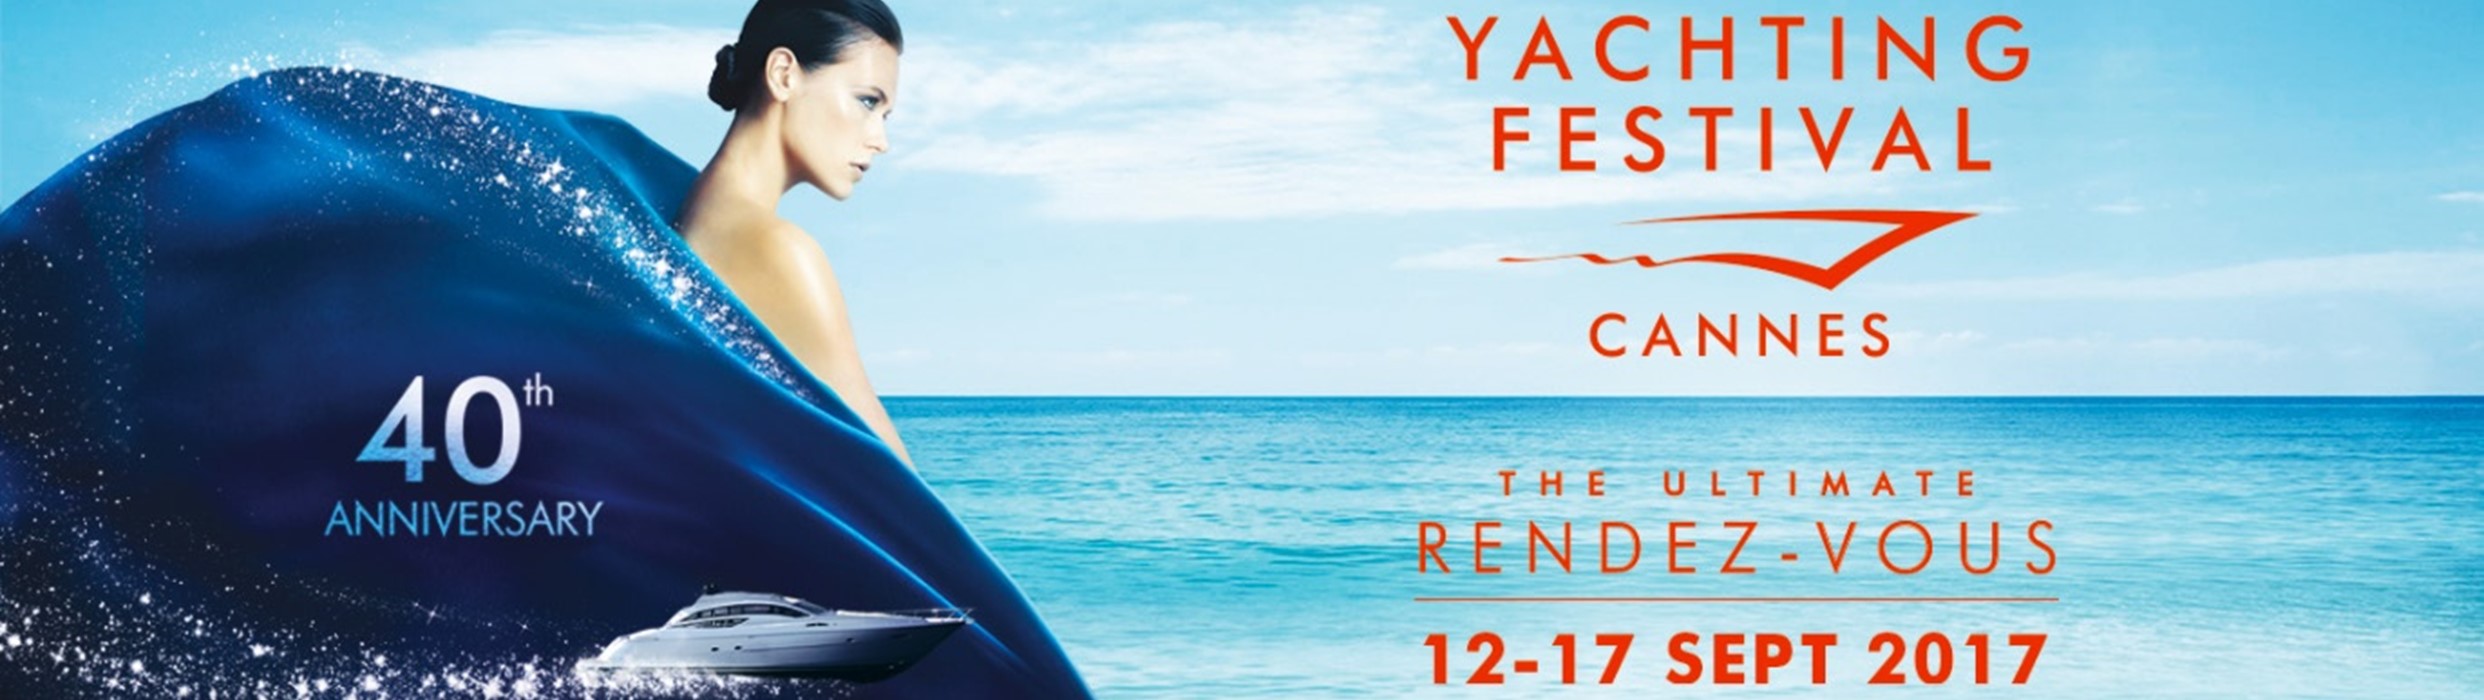 Yachting festival - Cannes - The ultimate rendez-vous. 12-17 SEPT 2017